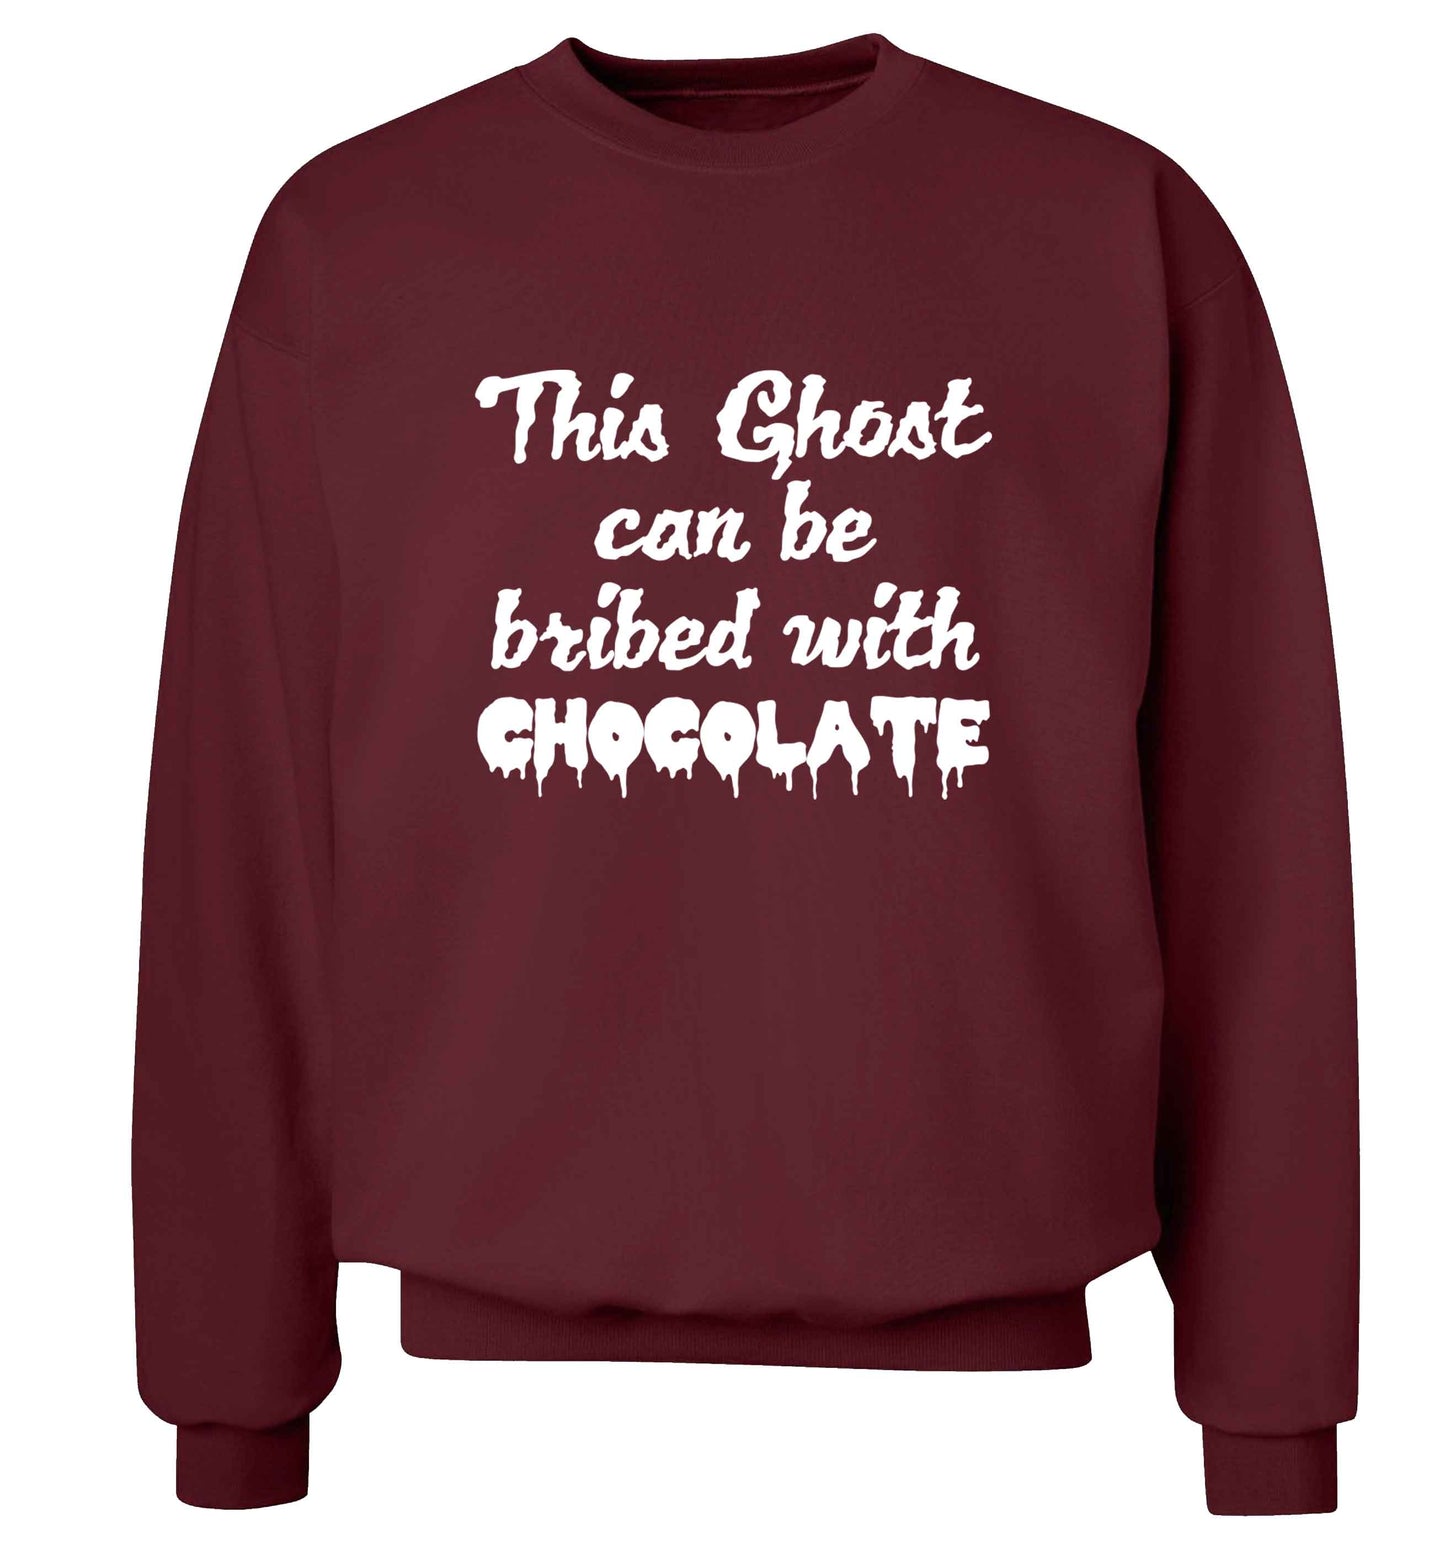 This ghost can be bribed with chocolate adult's unisex maroon sweater 2XL